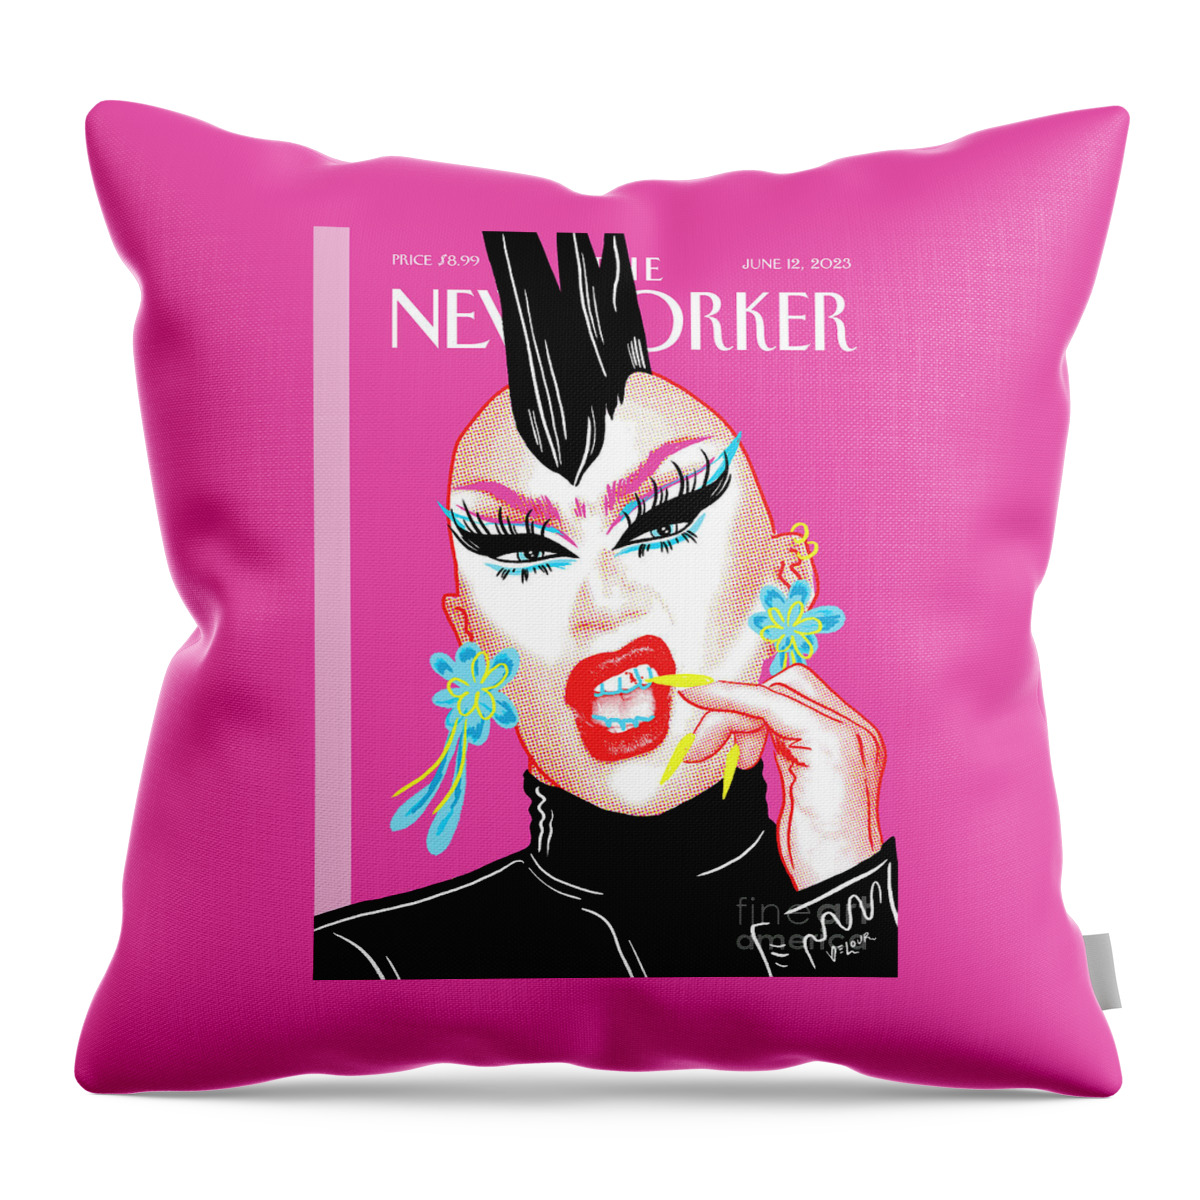 The Look Of Pride Throw Pillow